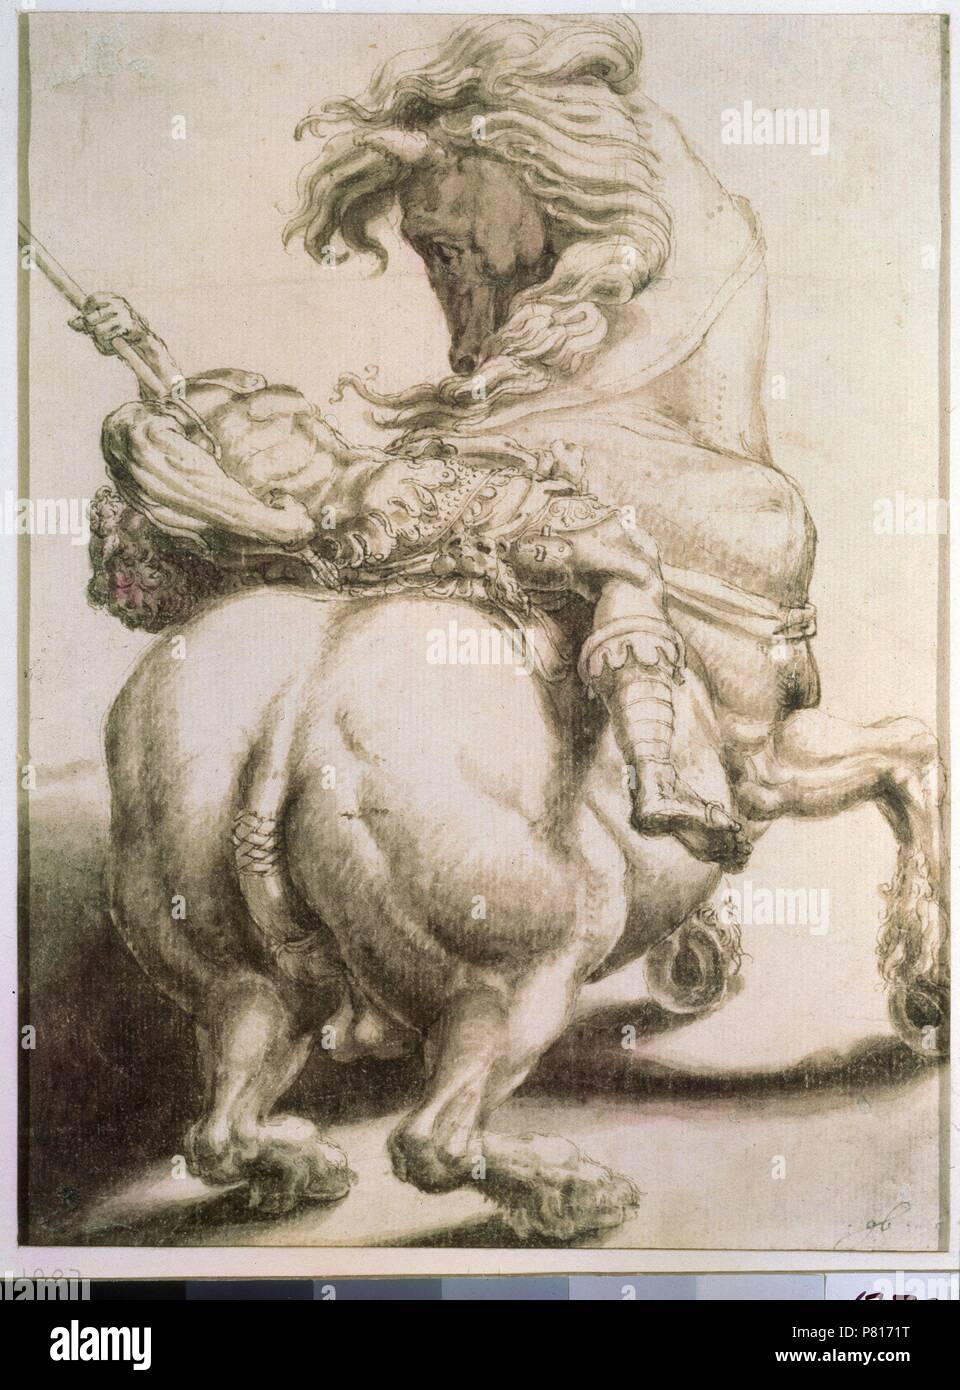 Rider pierced by a spear. Museum: State A. Pushkin Museum of Fine Arts, Moscow. Stock Photo